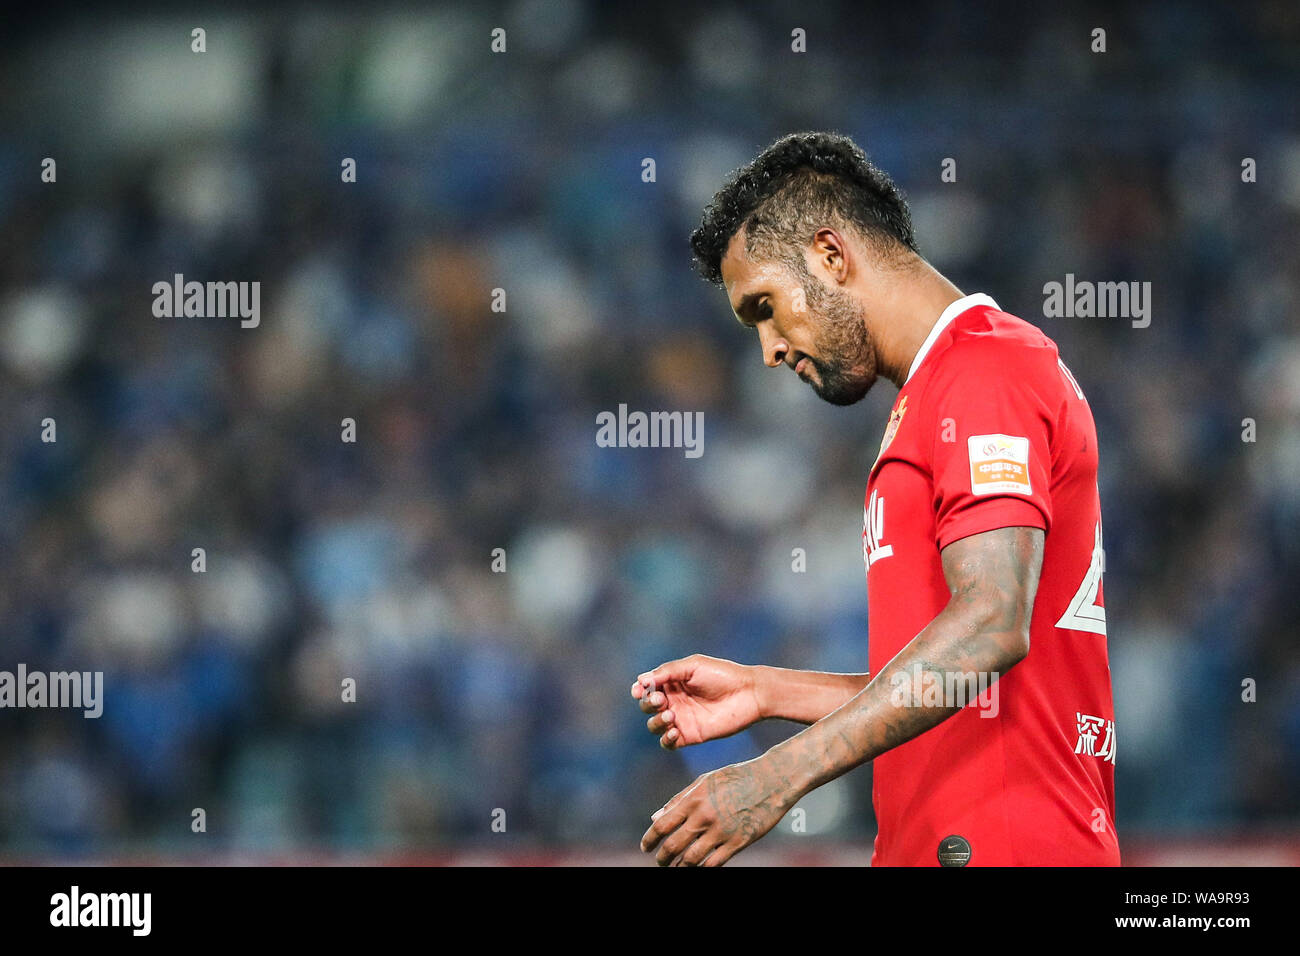 Brazilian-born Portuguese football player Dyego Sousa of Shenzhen FC reacts as he competes against Jiangsu Suning in their 20th round match during the Stock Photo